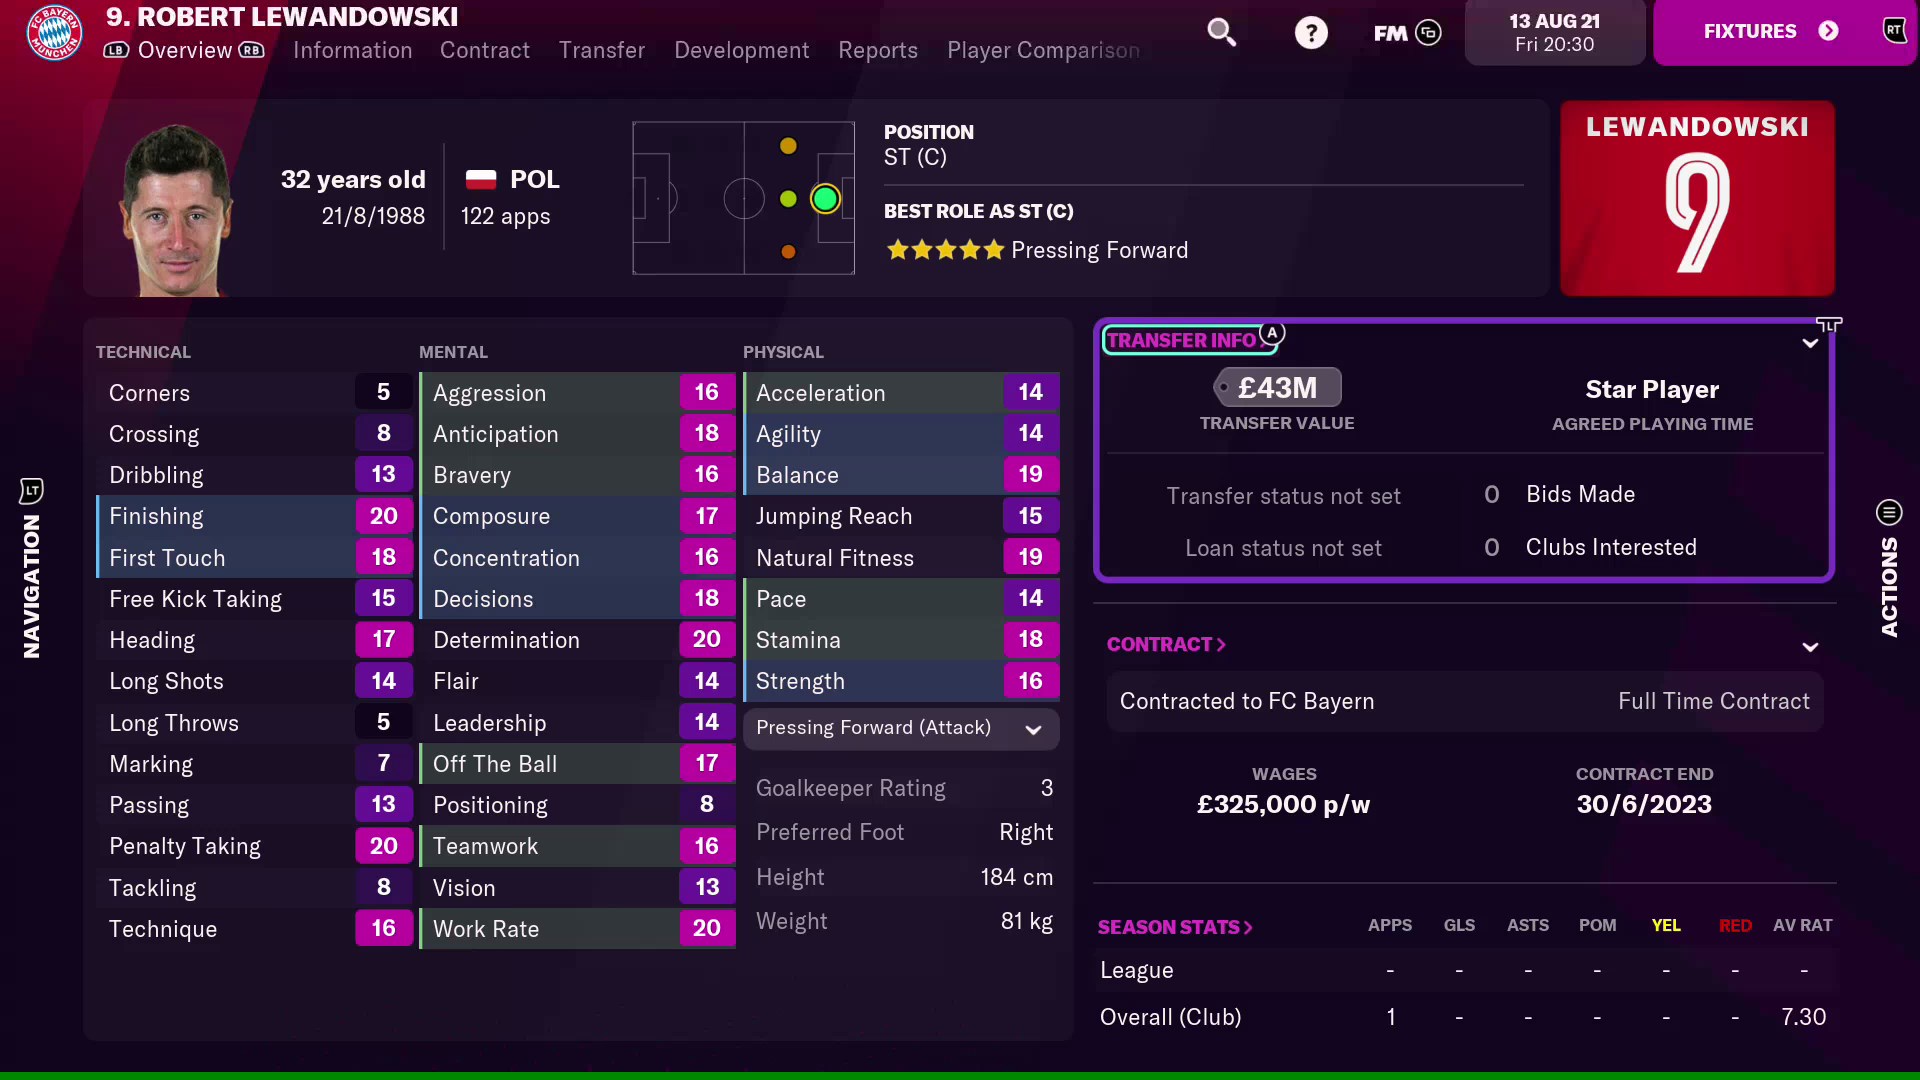 Football Manager 2022 now free-to-play on Steam and Xbox until